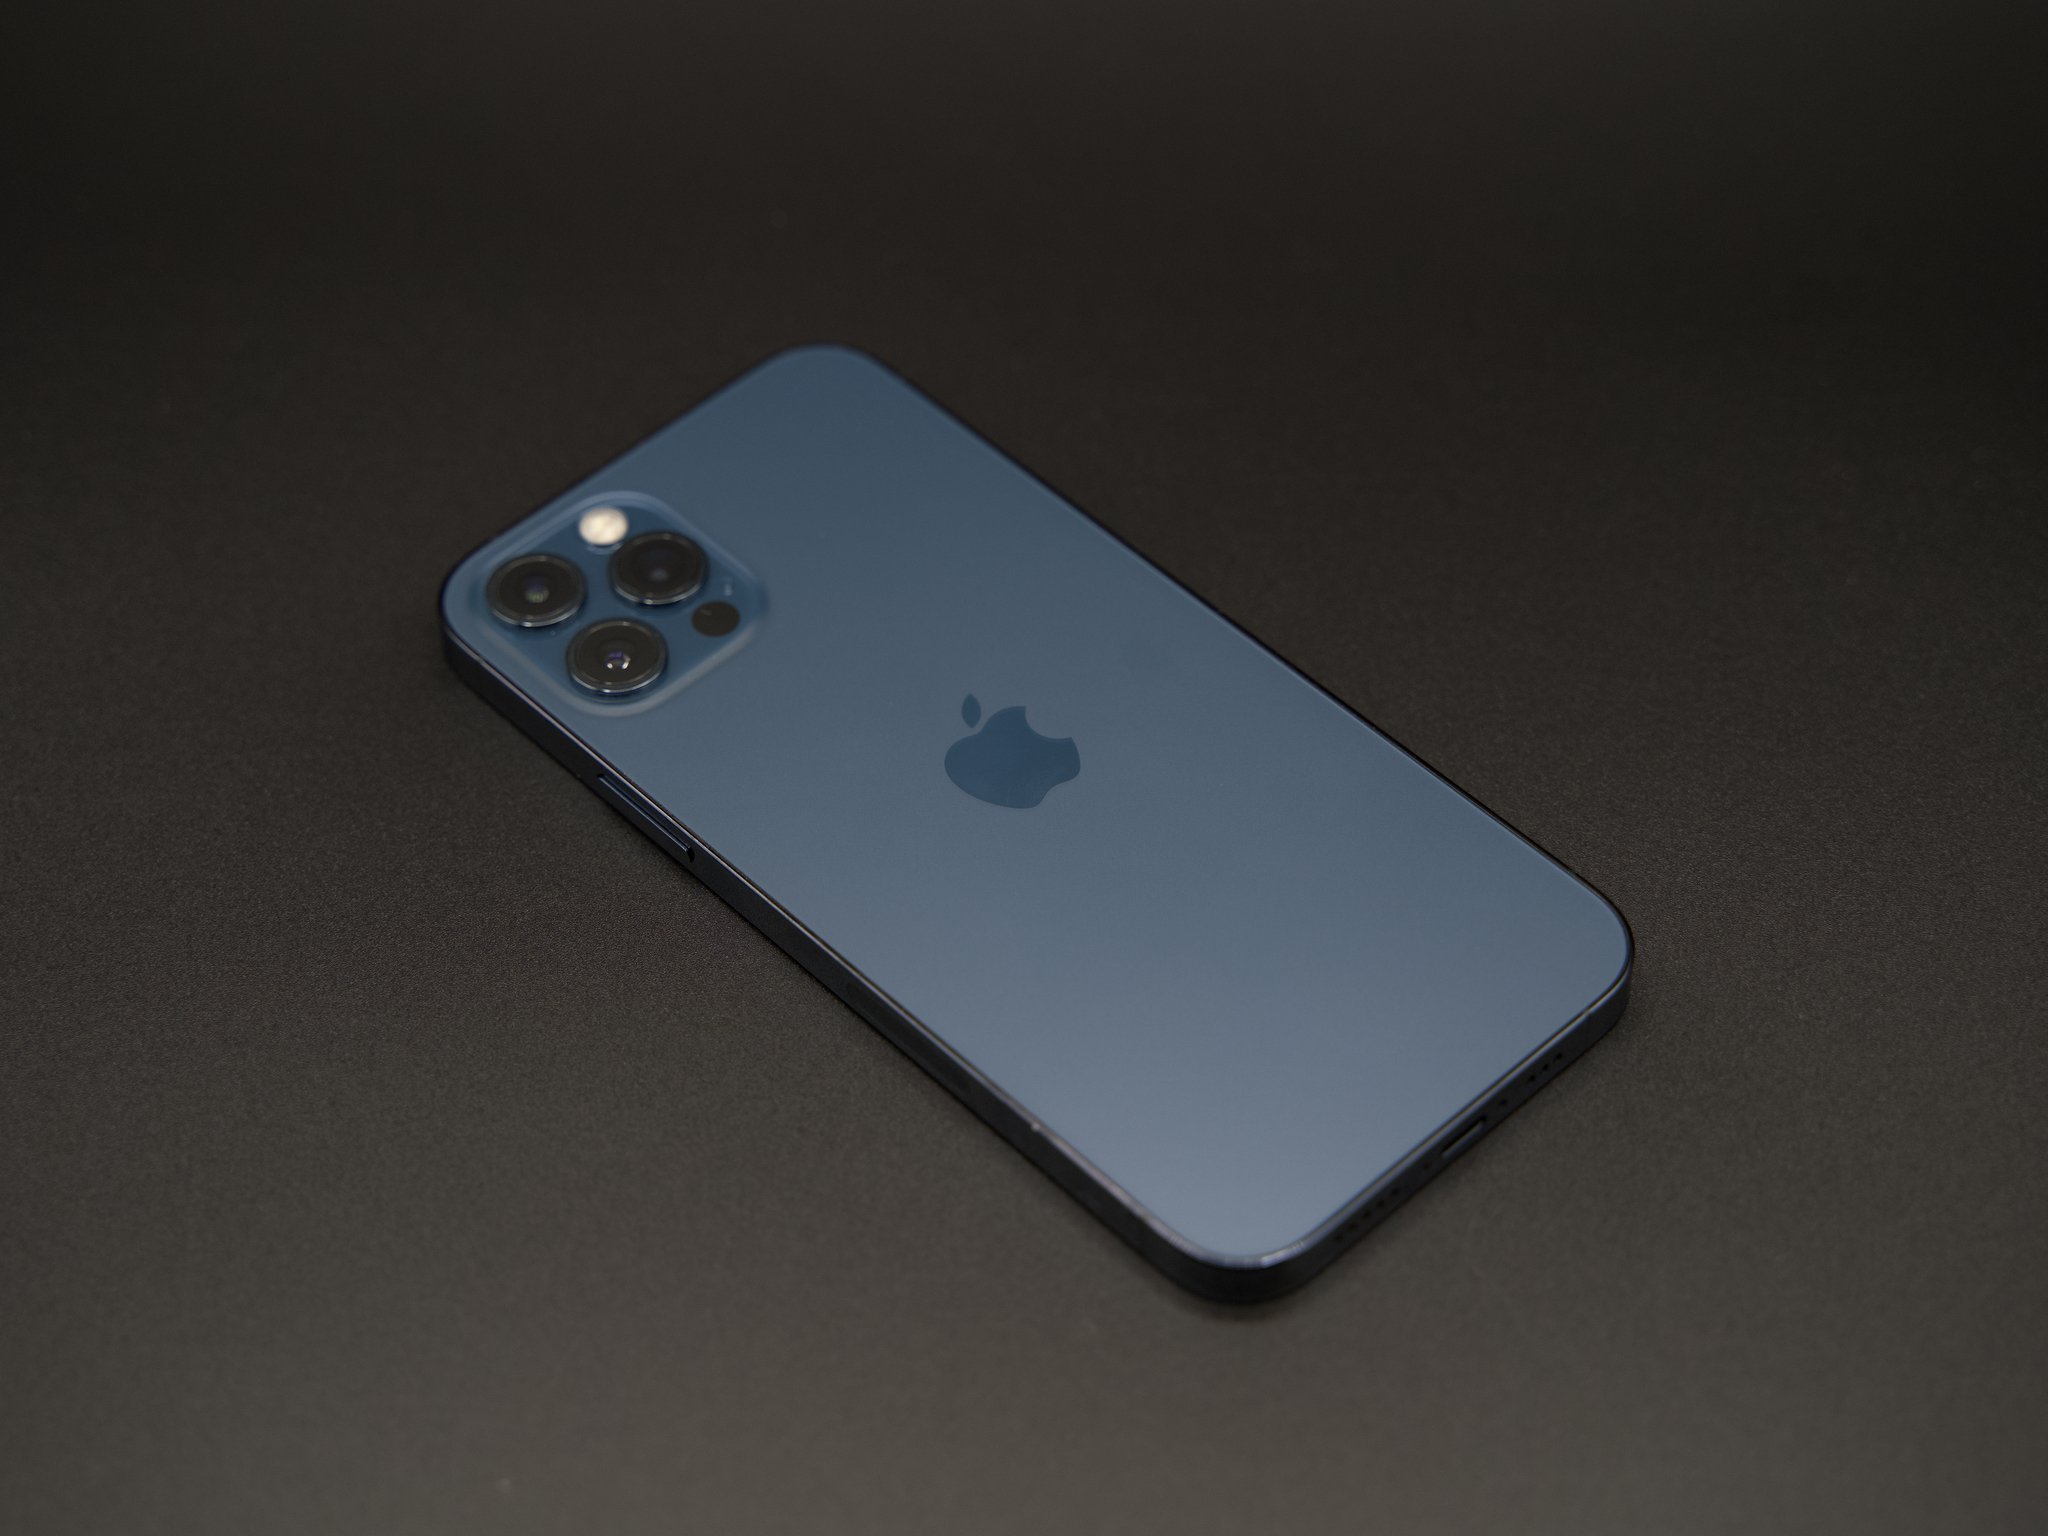 iPhone 12 Pro in Pacific Blue seems to be the most popular